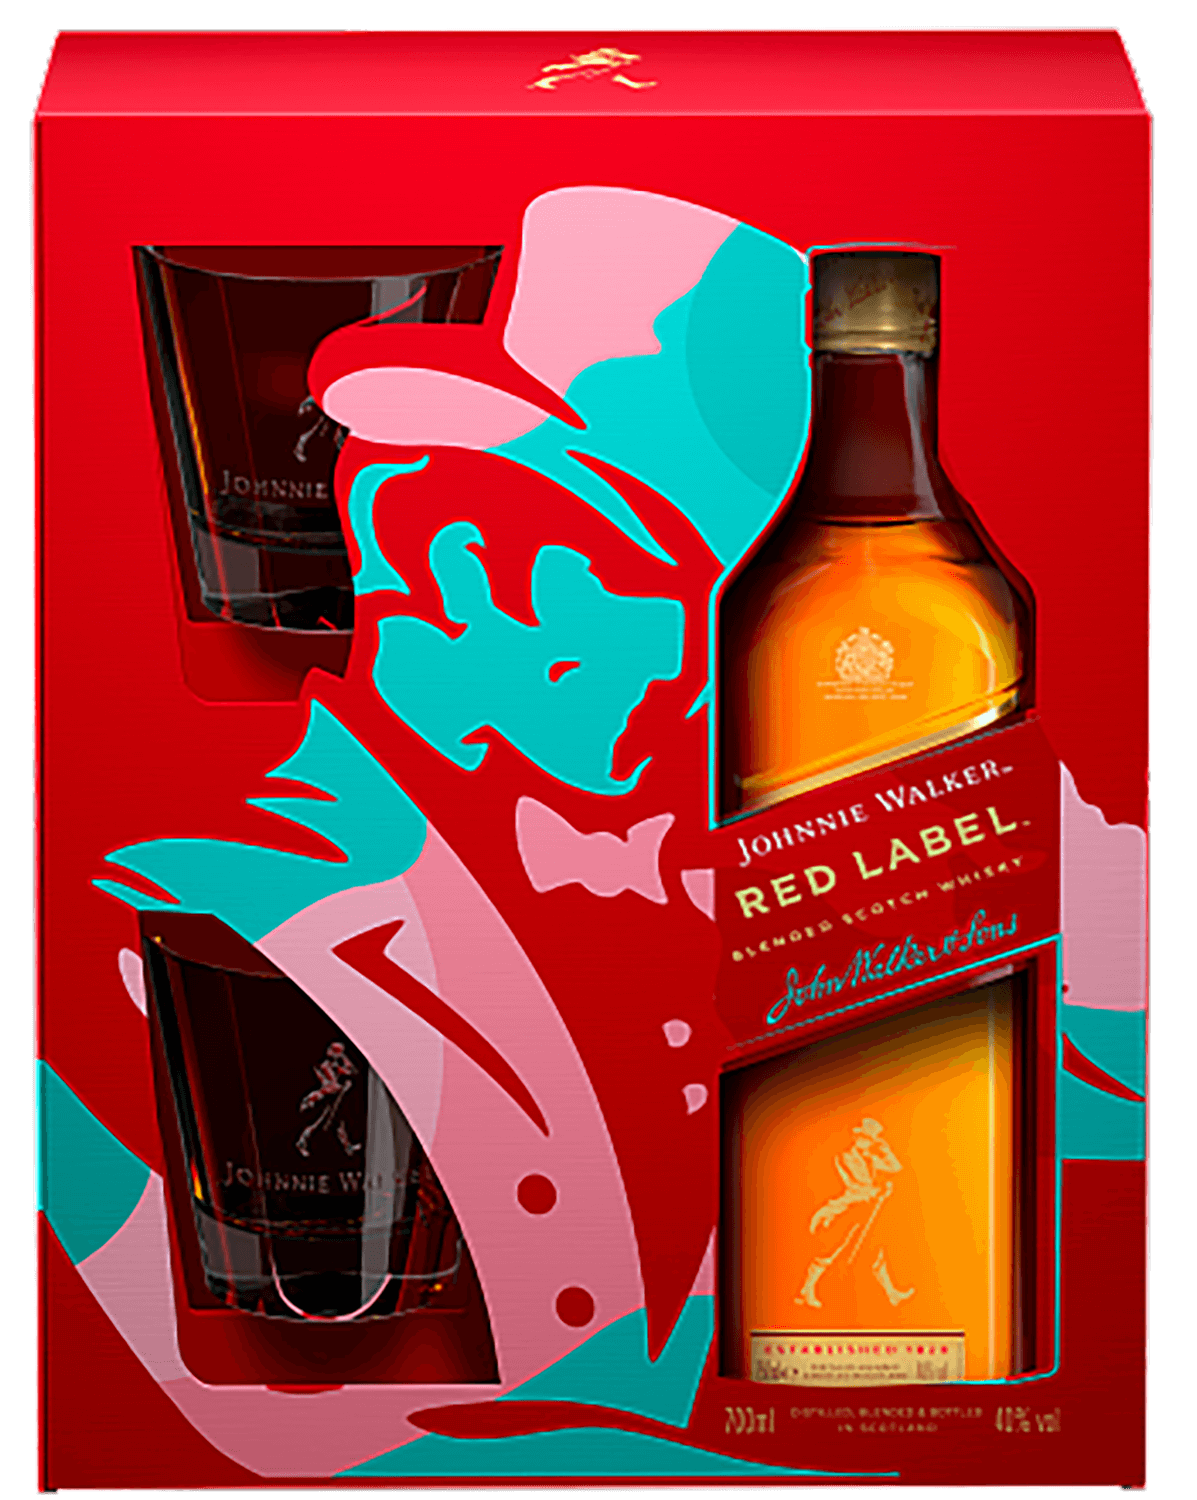 Johnnie Walker Red Label Blended Scotch Whisky (gift box with 2 glasses)